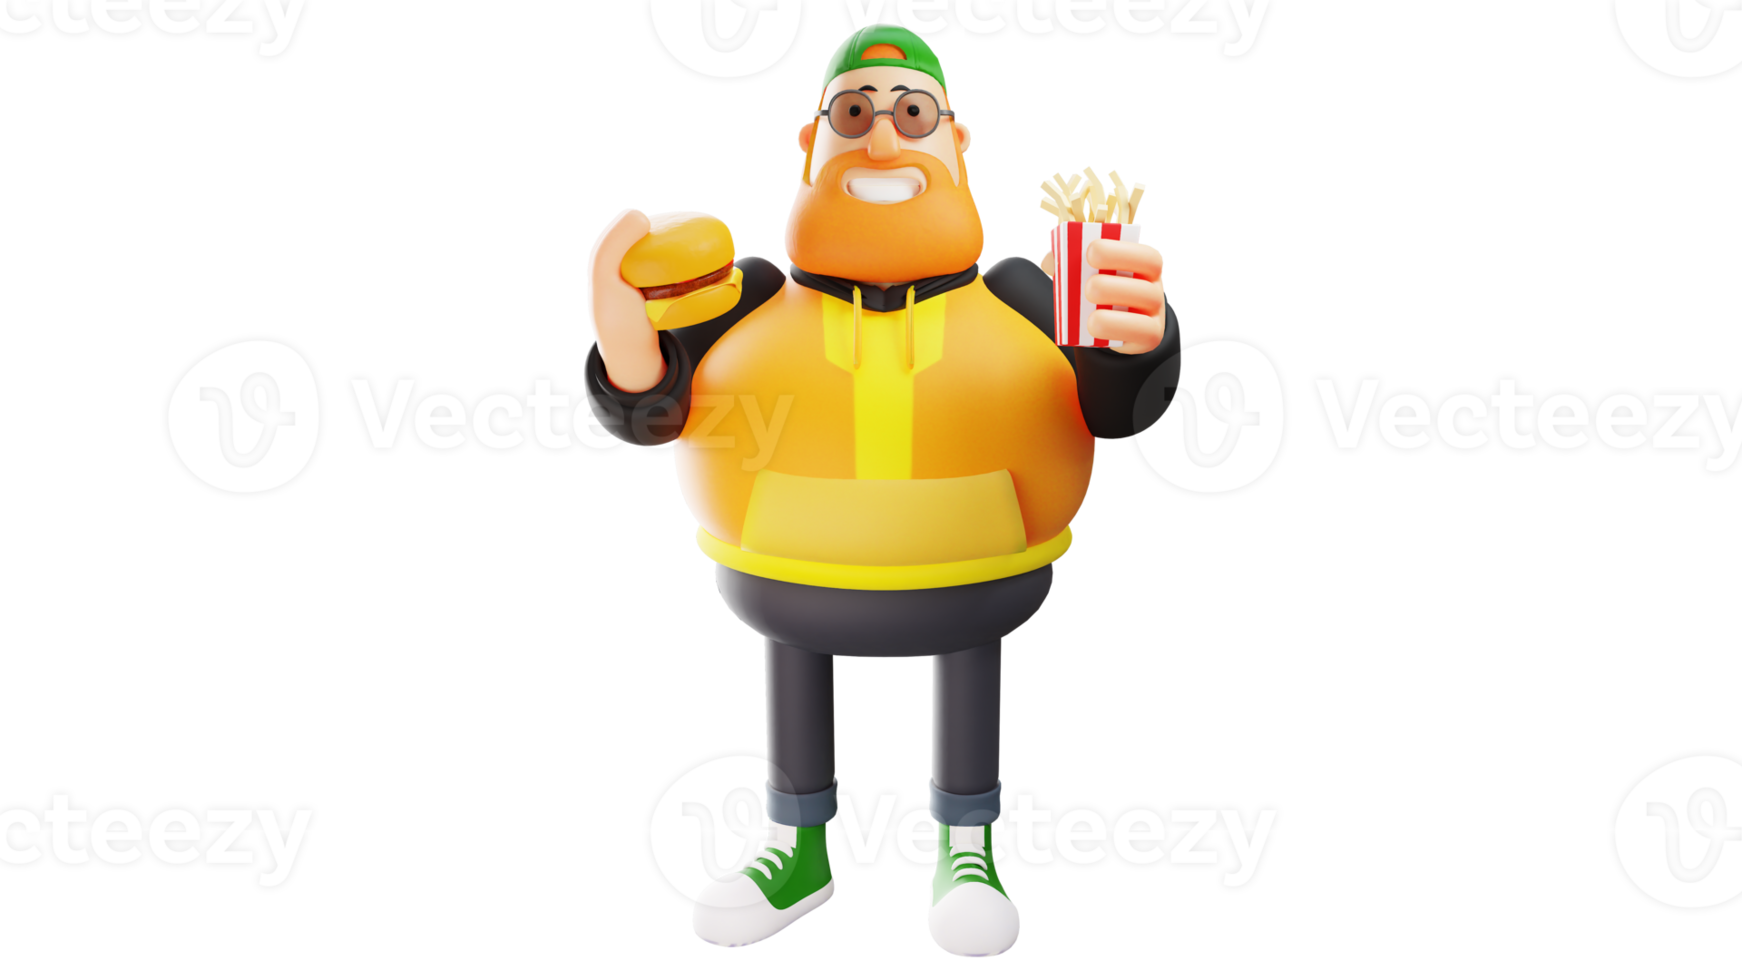 3D Illustration. Hungry Fat Man 3D Cartoon Character. A happy fat man is holding a burger and french fries. The fat man smiled and was ready to eat. 3D Cartoon Character png